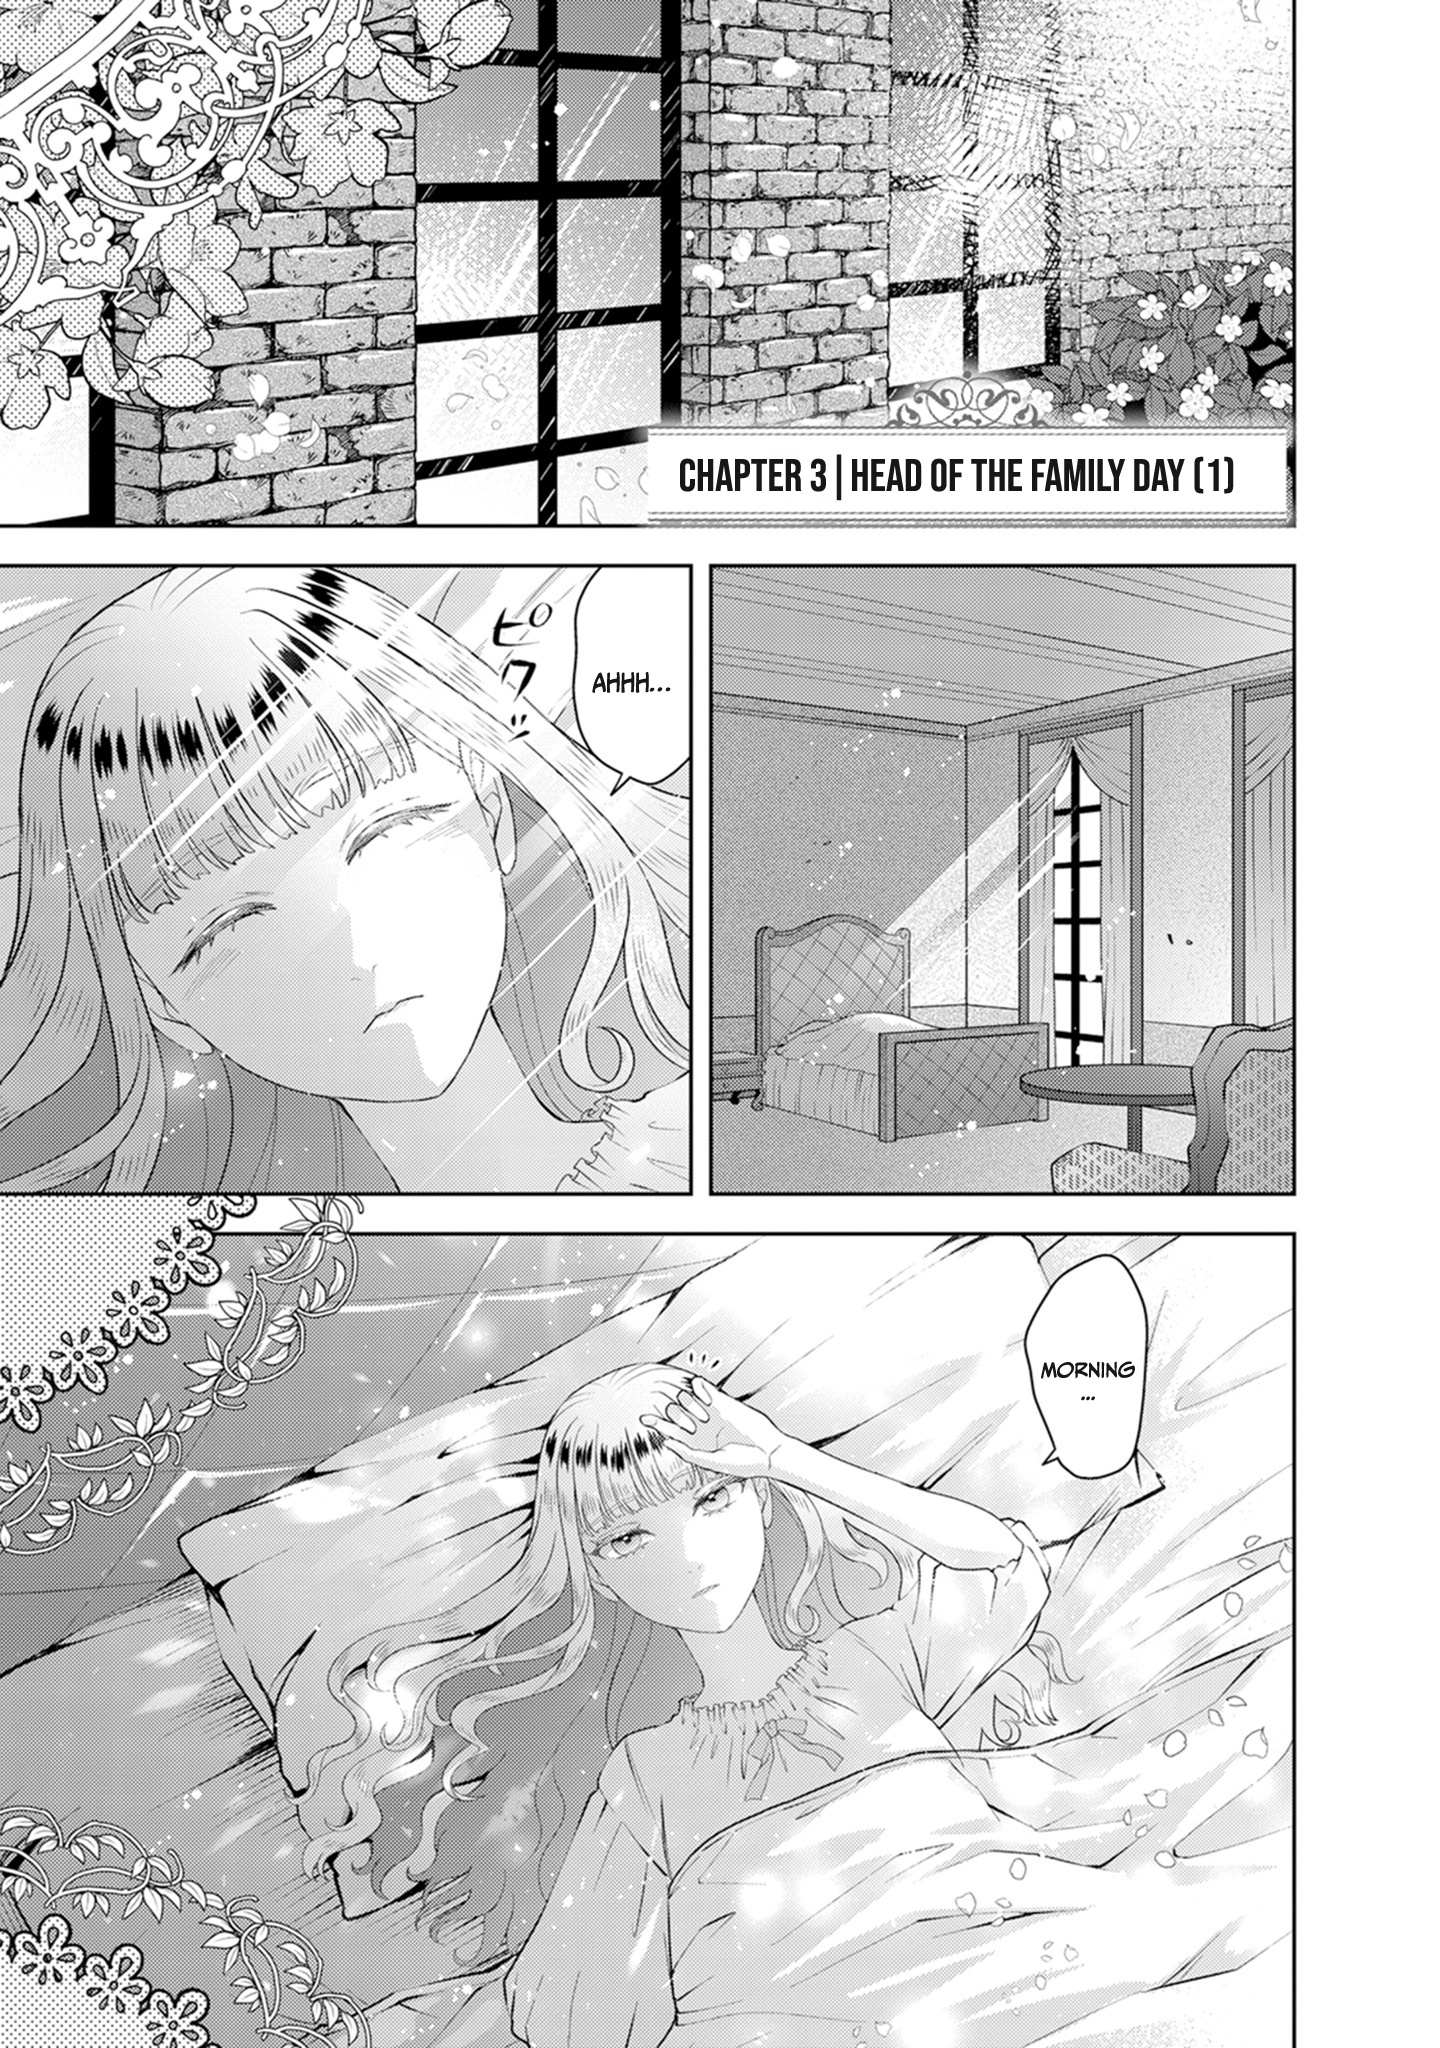 The Villainess, Stuck In A Loop, Decides To Give Up And Live As She Pleases! - chapter 3 - #2